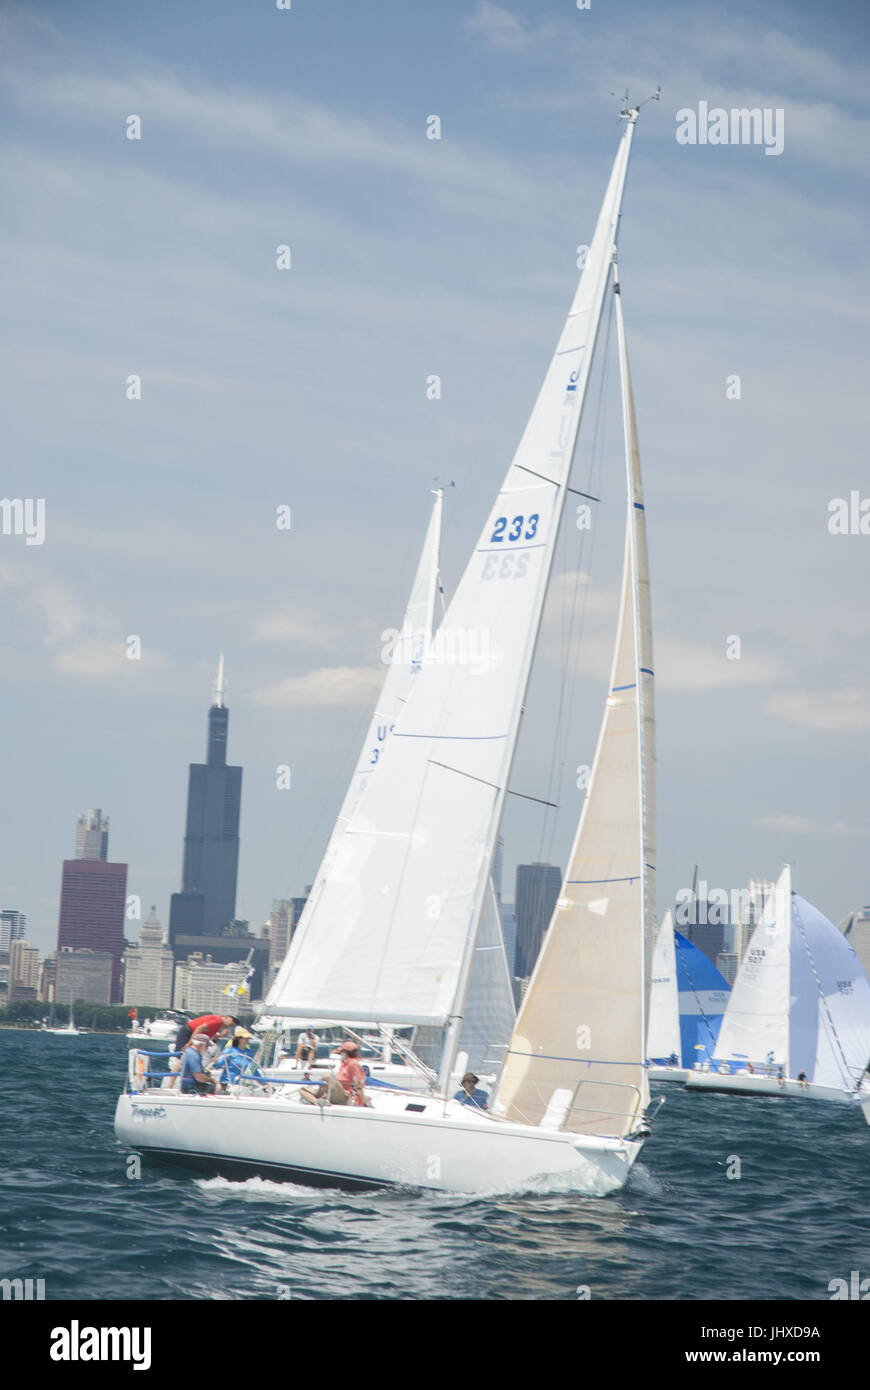 Chicago, IL, USA. 15th July, 2017. The boats are off in the Chicago Race to Mackinac. The ''cruising'' fleet of slower boats started their across-the-lake journey on Friday afternoon, July 14th. On Saturday, 19 fleets of boats began in waves every ten minutes. The largest and fastest boat were in the last two sections - turbo and multihull. The record-holder for time for a monohull occured in 2002 by Roy Disney's Pyewacket at 23 hours 30 minutes. High winds and waves have caused 70 boats to drop out of the race by Sunday afternoon. Two boats capsized. 5 crew members were rescued by another Stock Photo